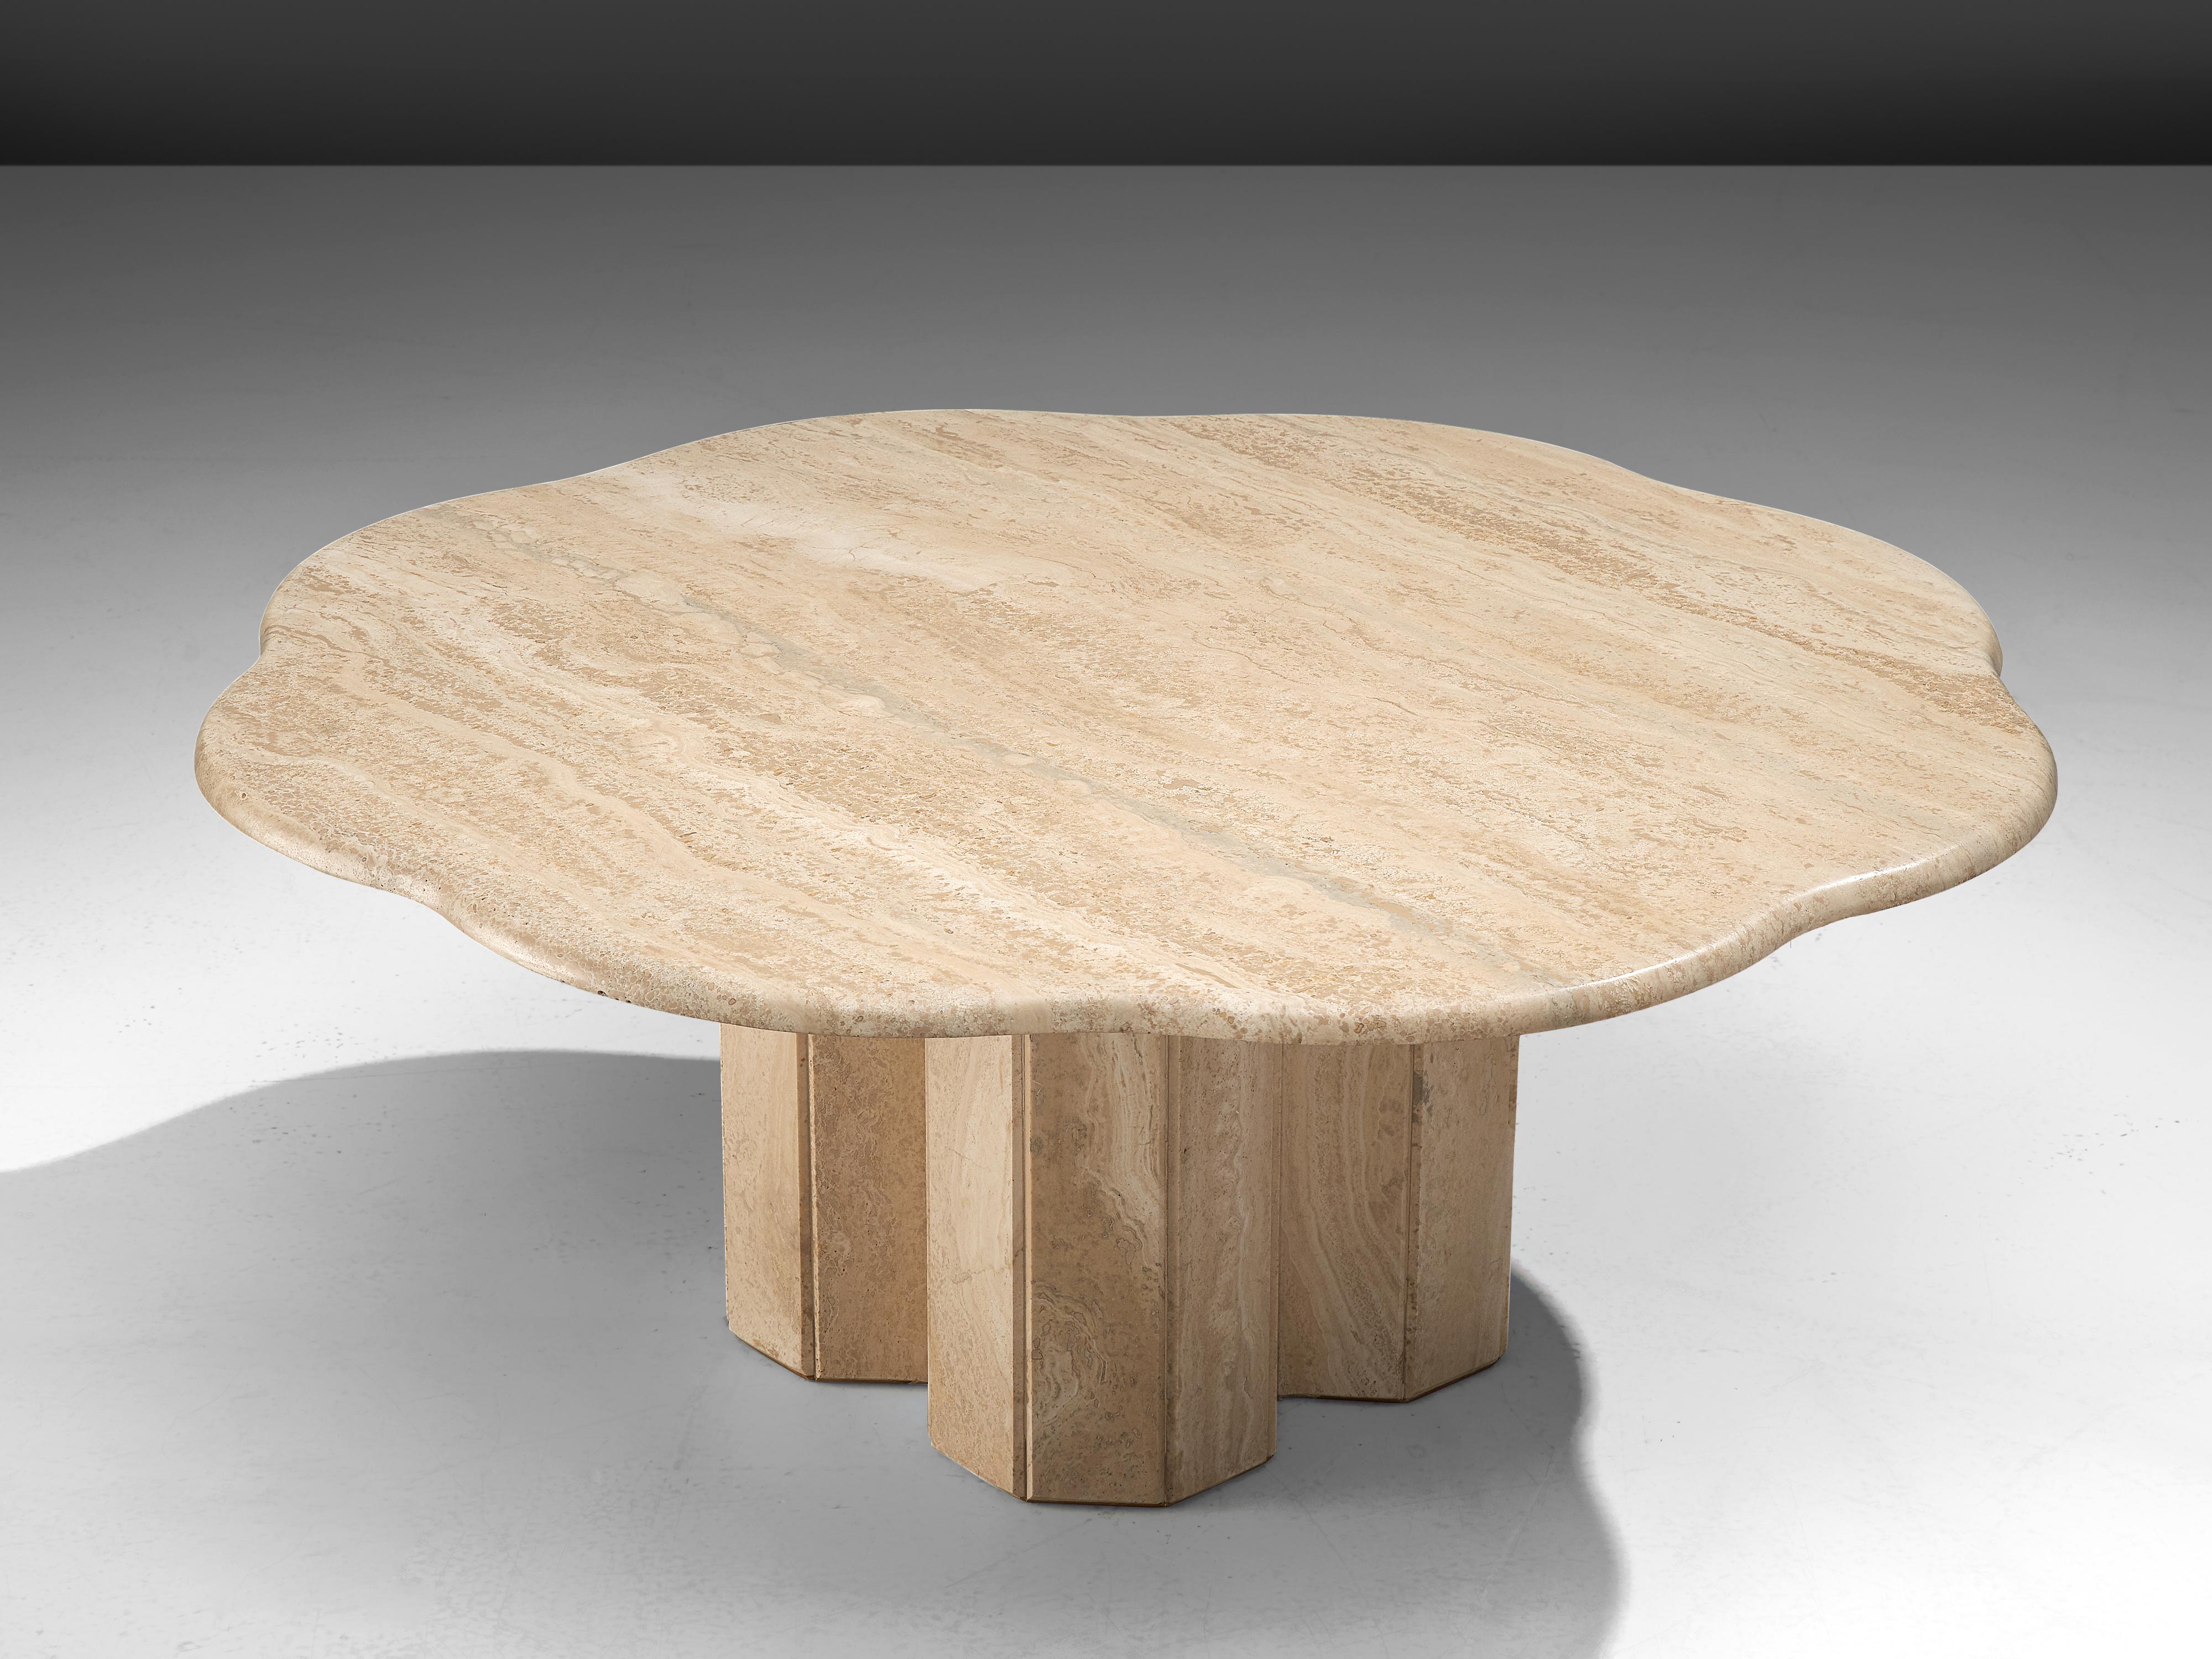 Coffee table, travertine, Europe, 1970s

Stunning coffee table with a biomorphic, flower inspired shaped tabletop. The base features the same motif in an angular design. Therefore a lovely contrast is created between the architectural base and the